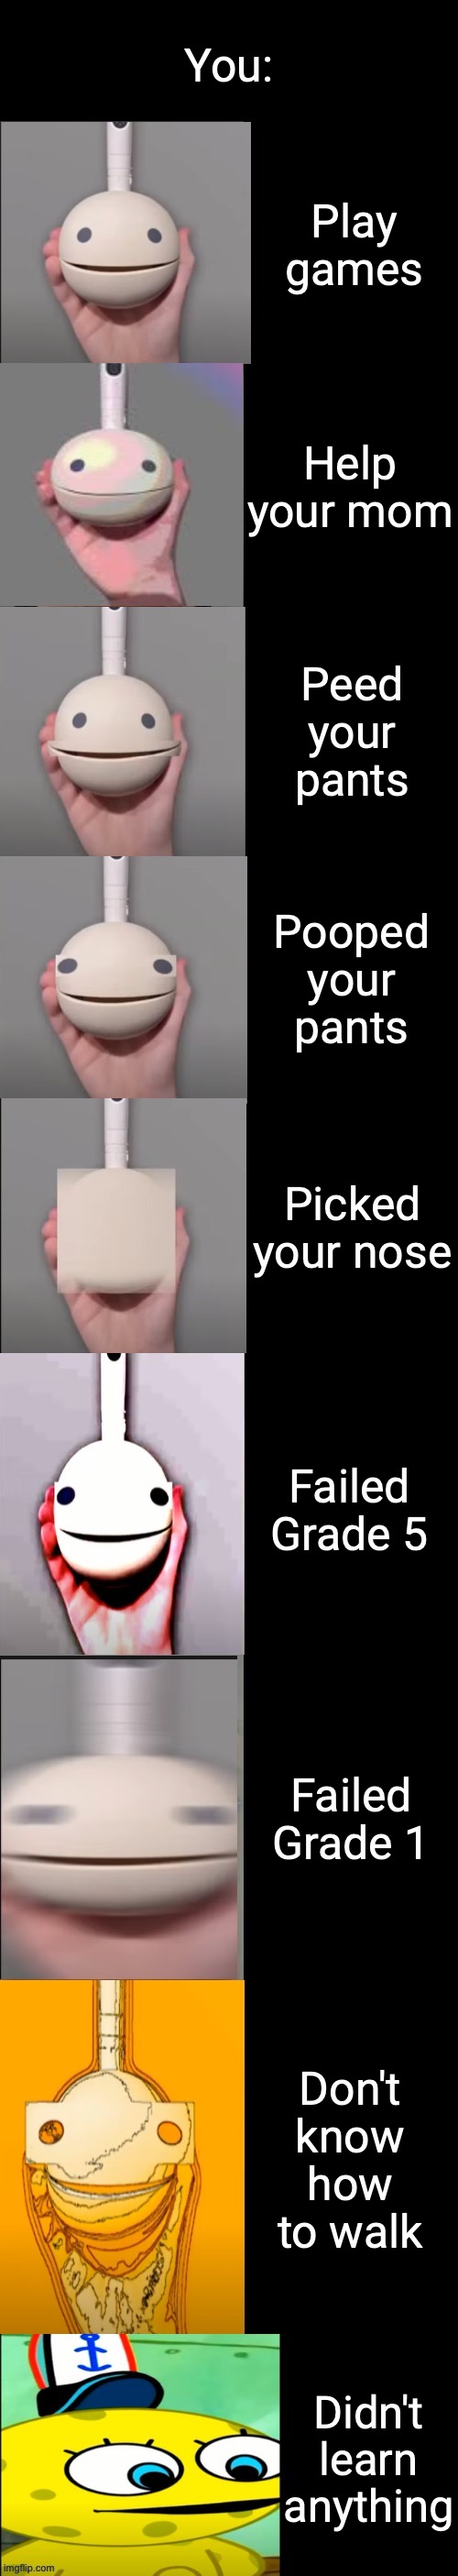 Otamatone becoming idiot | You:; Play games; Help your mom; Peed your pants; Pooped your pants; Picked your nose; Failed Grade 5; Failed Grade 1; Don't know how to walk; Didn't learn anything | image tagged in otamatone becoming idiot,idiot,otamatone,wah wah | made w/ Imgflip meme maker